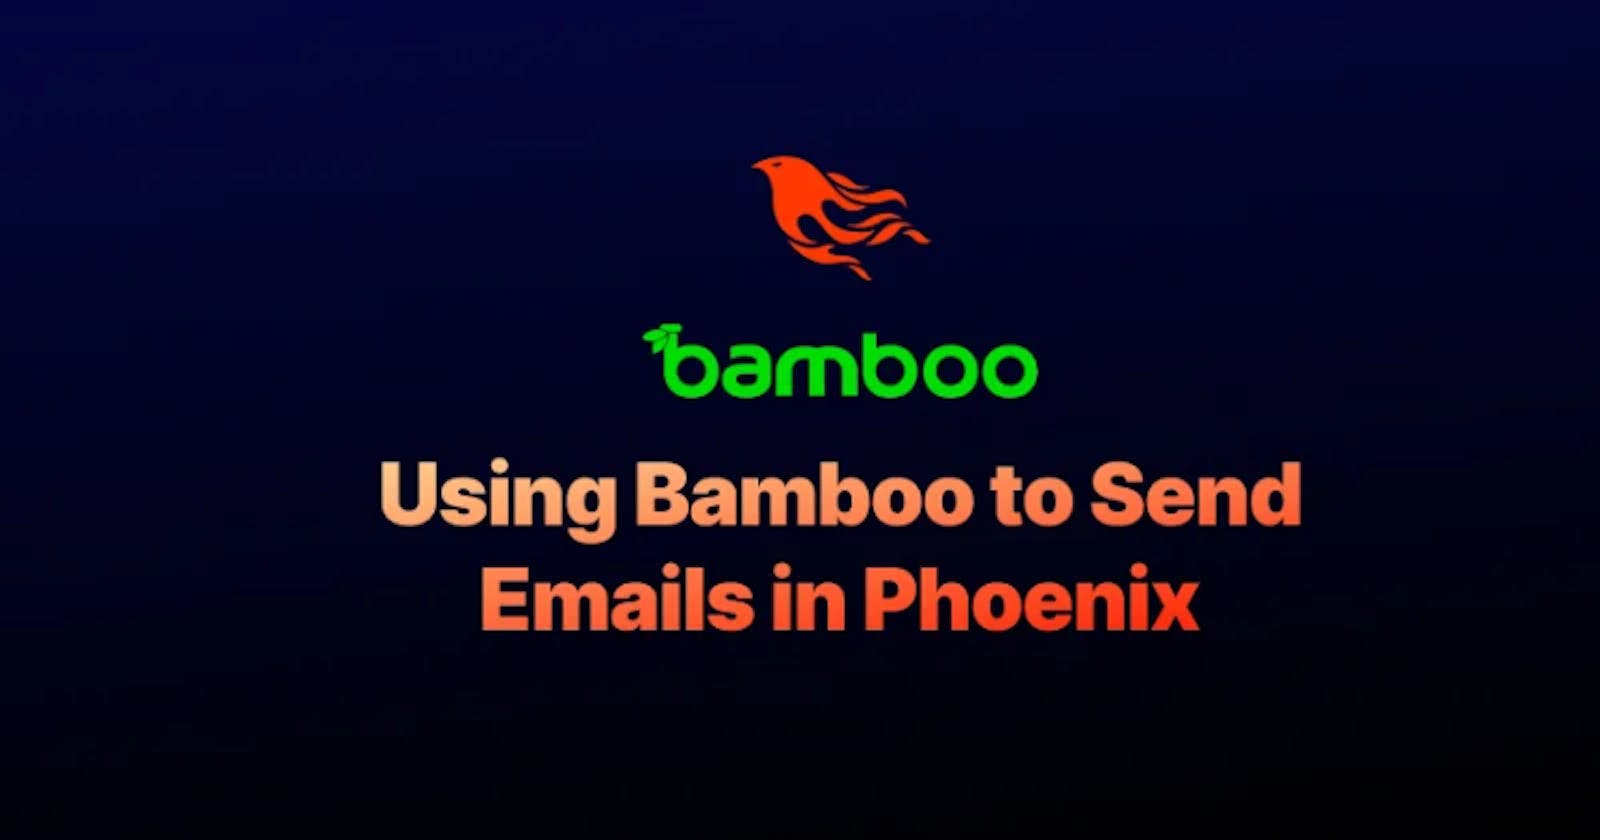 Using Bamboo to Send Emails in Phoenix